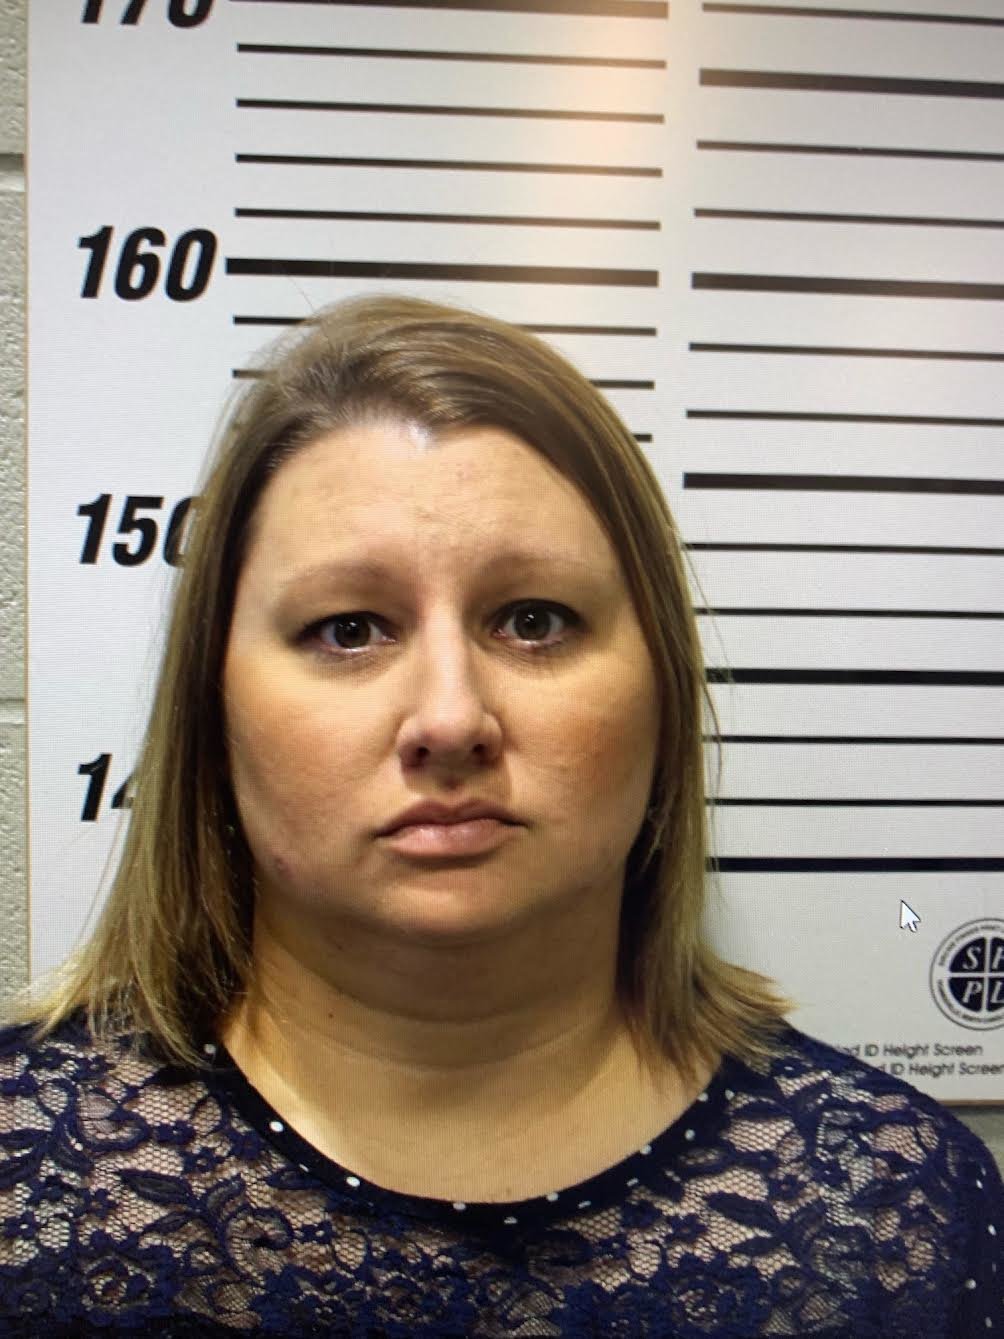 Lacey Stokes, of Marshfield, has pled guilty to felony charges of stealing and exploiting the elderly. Sentencing will take place on Monday, Jan. 31.